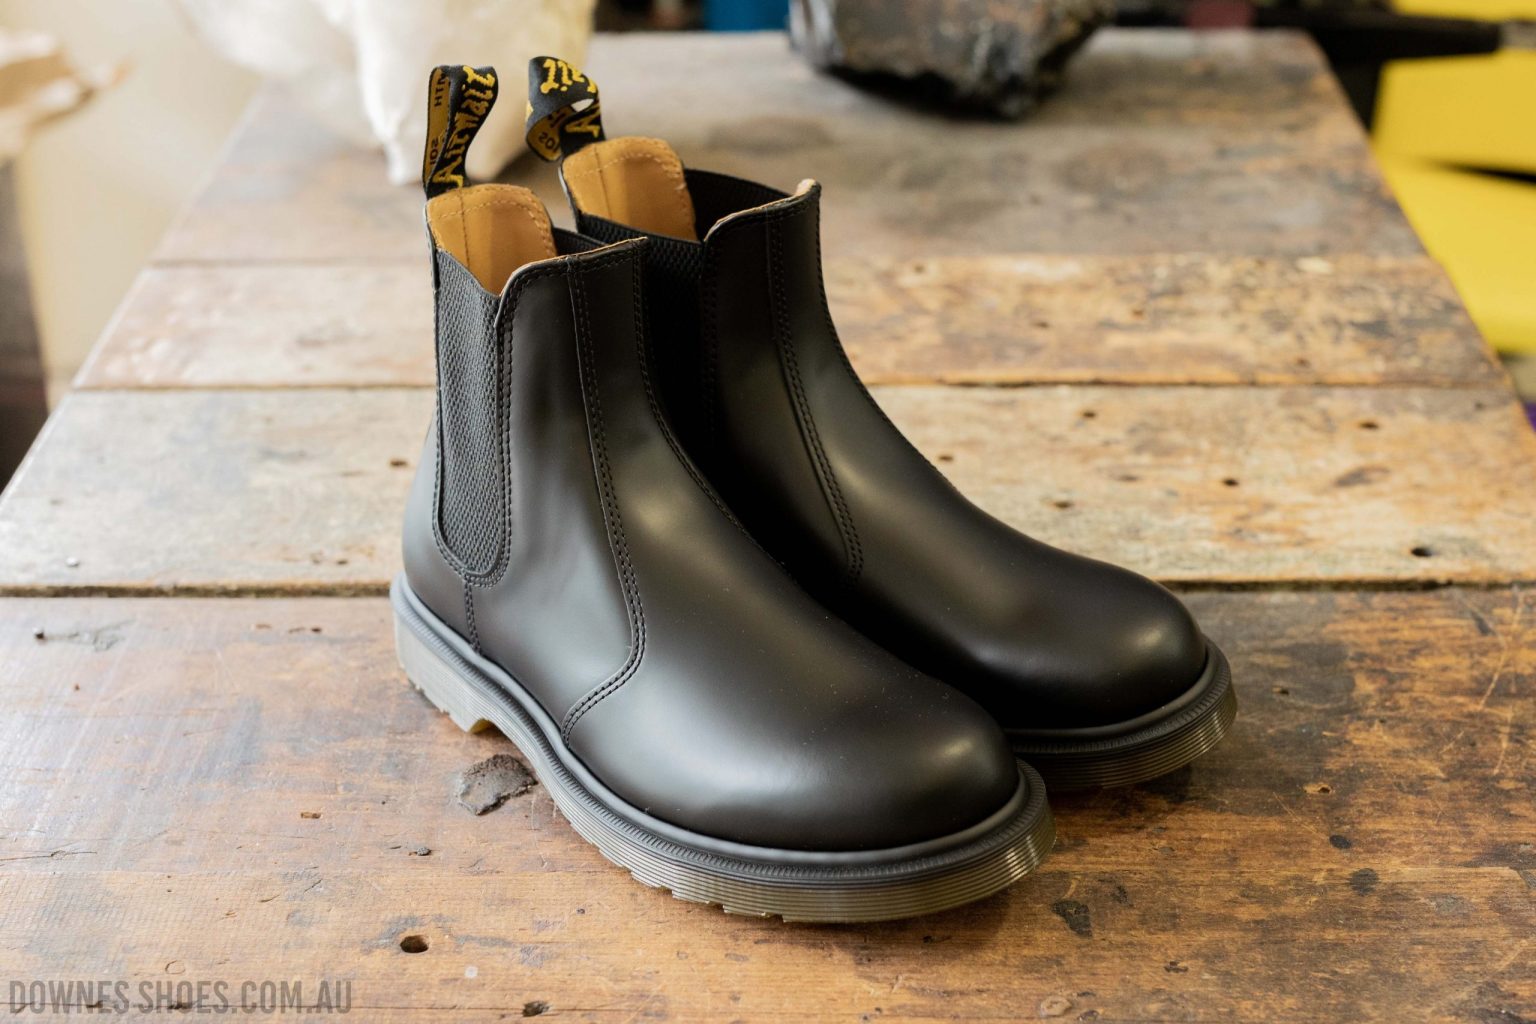 Stylish Dr. Martens Chelsea Boots positioned elegantly on a grassy soccer field